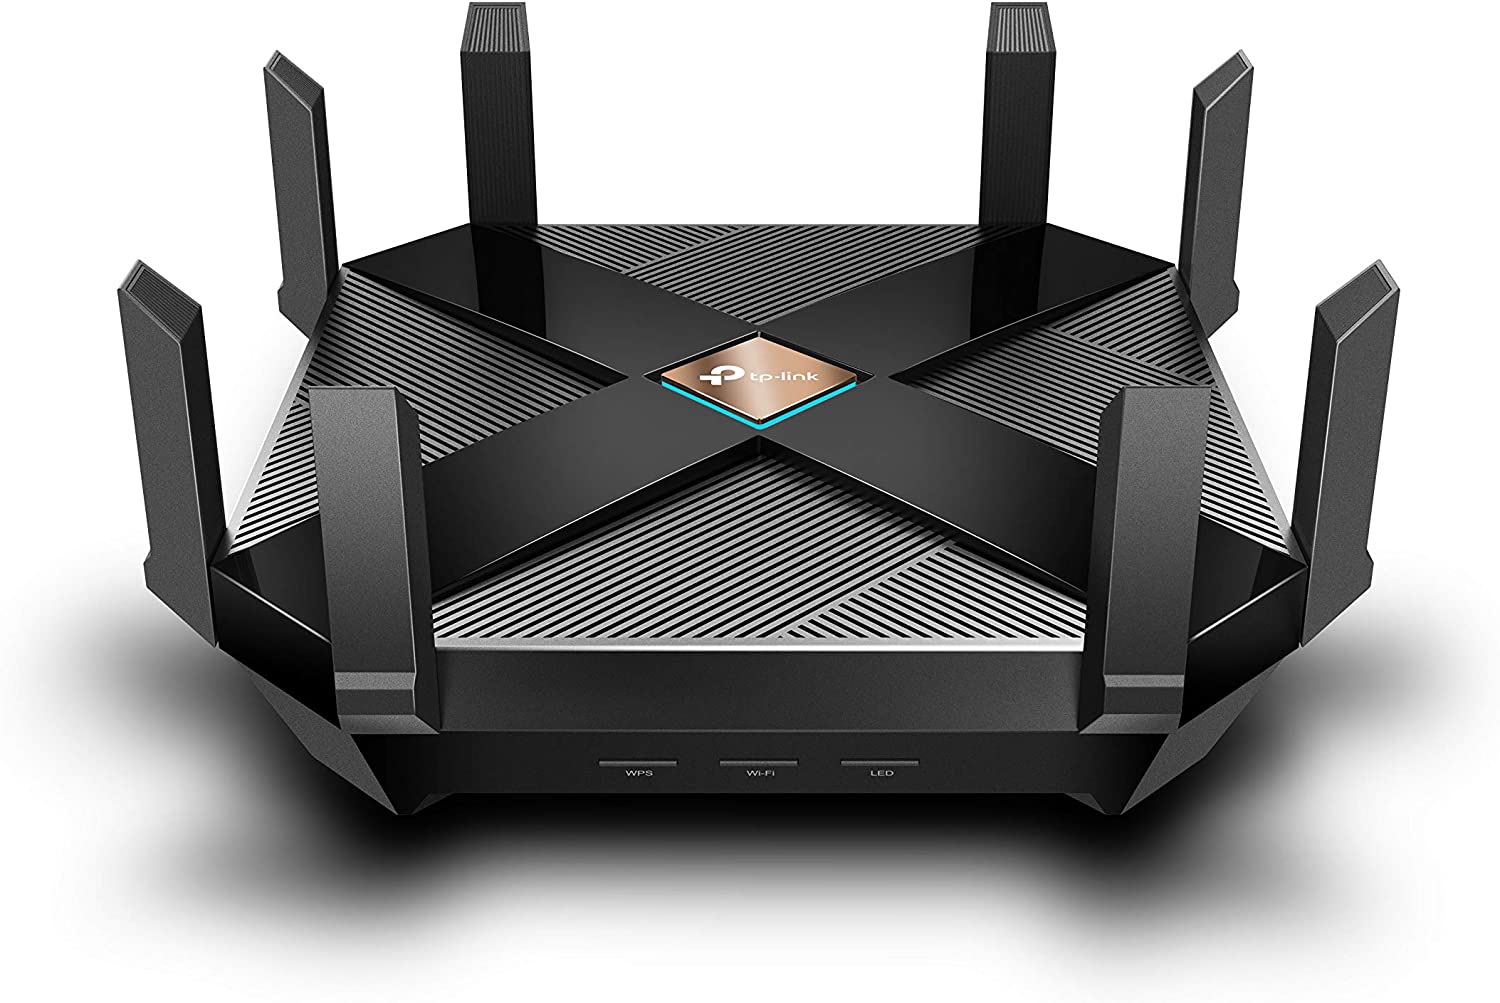 TP-Link AX6000 WiFi 6 Router, 8-Stream Smart WiFi Router (Archer AX6000)